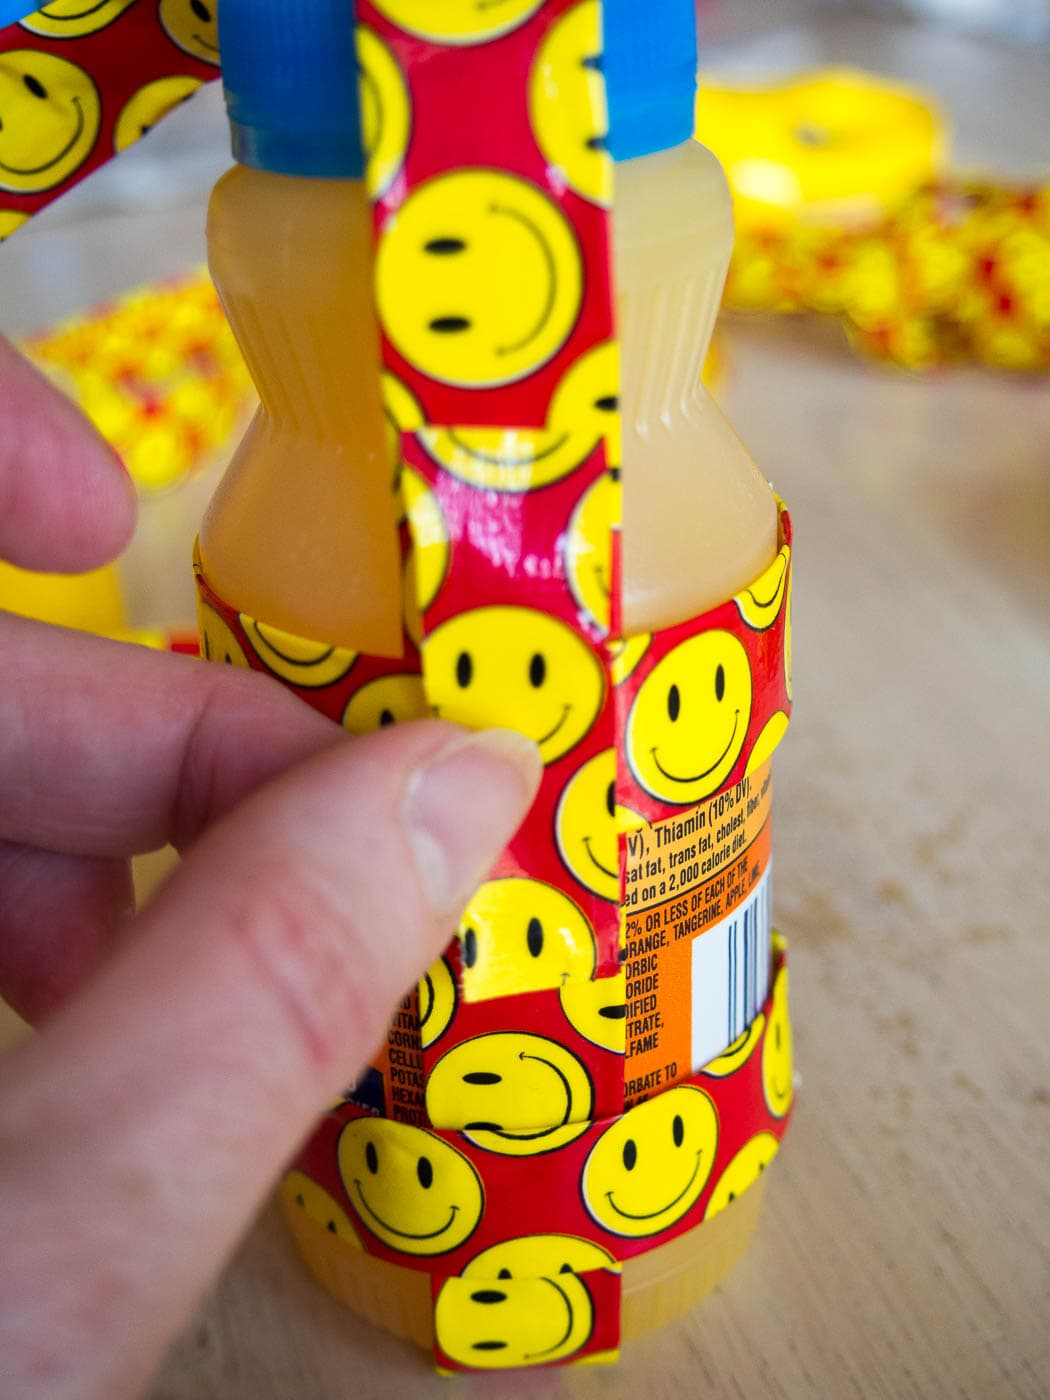 A person is wrapping a smiley face on a bottle of juice using duct tape.